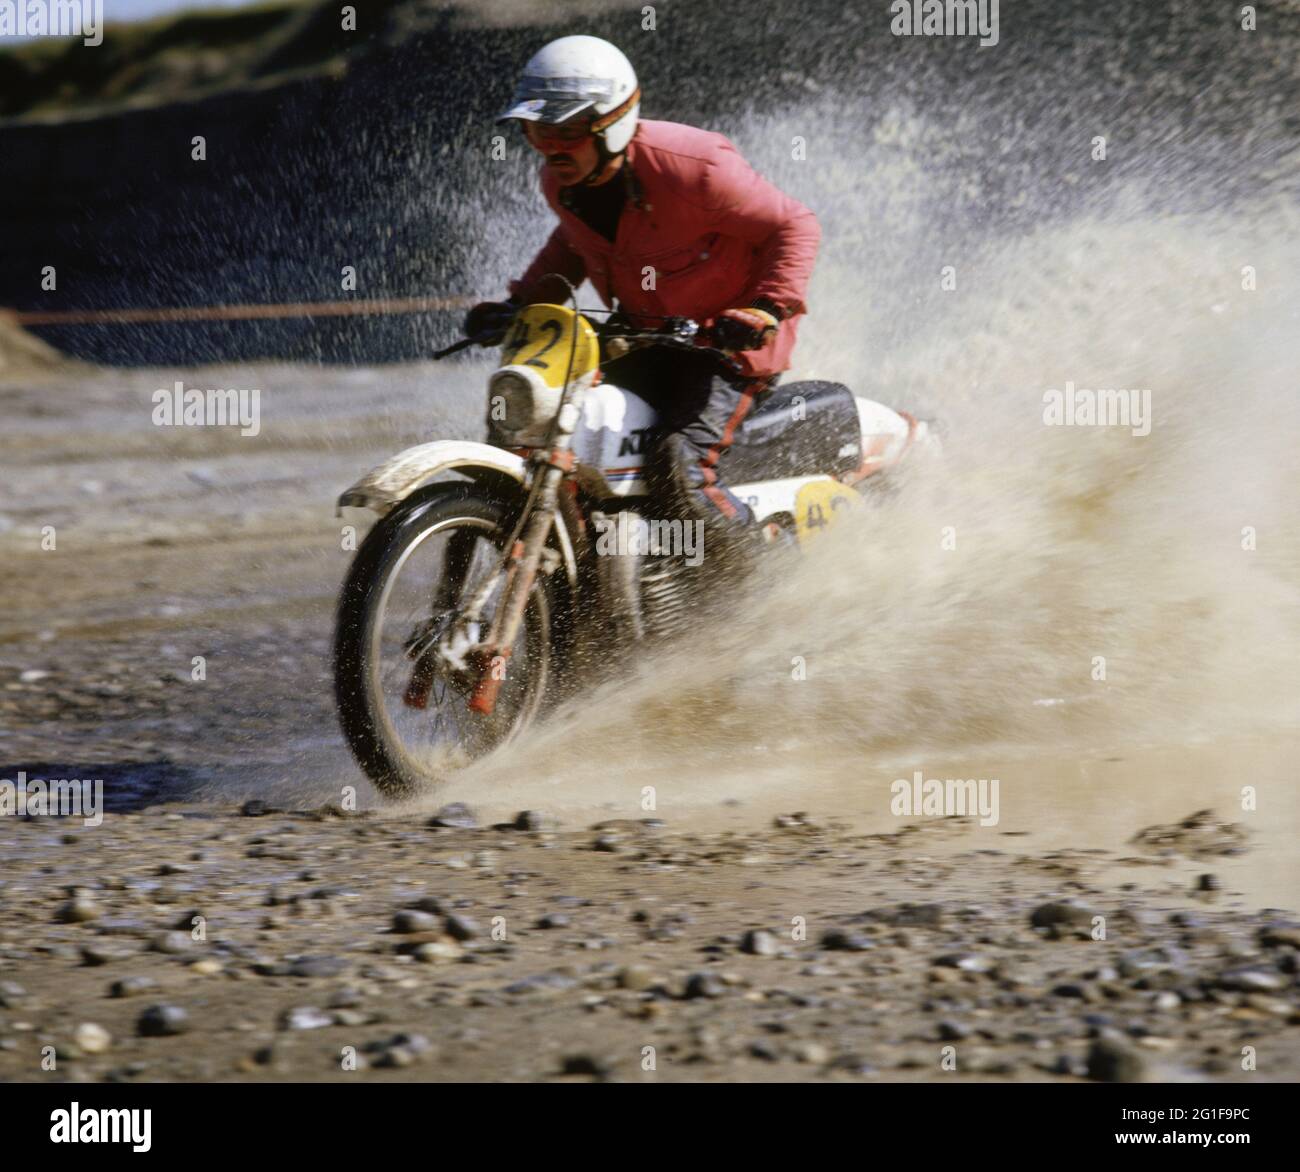 sports, motorcycle, cross country drive, 70s, ADDITIONAL-RIGHTS-CLEARANCE-INFO-NOT-AVAILABLE Stock Photo